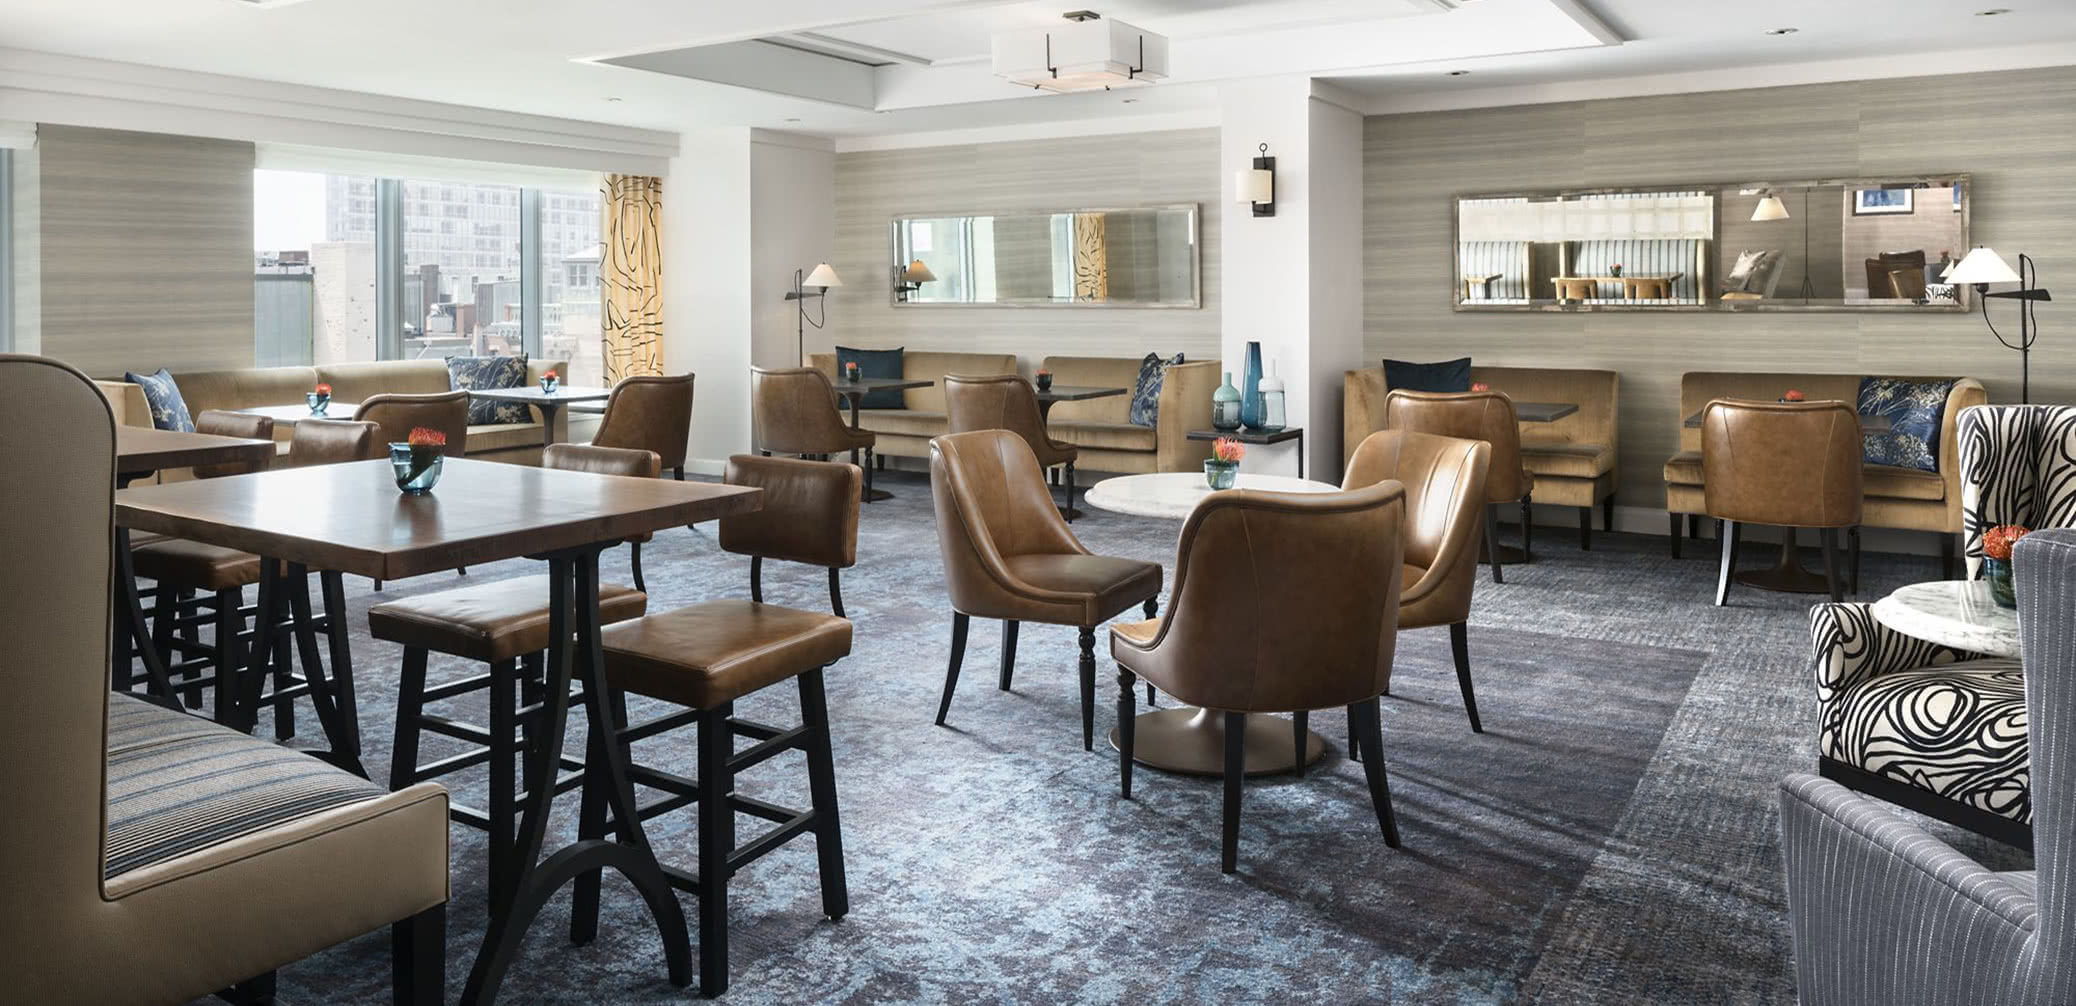 Best Hotel Executive Club Lounges In Boston